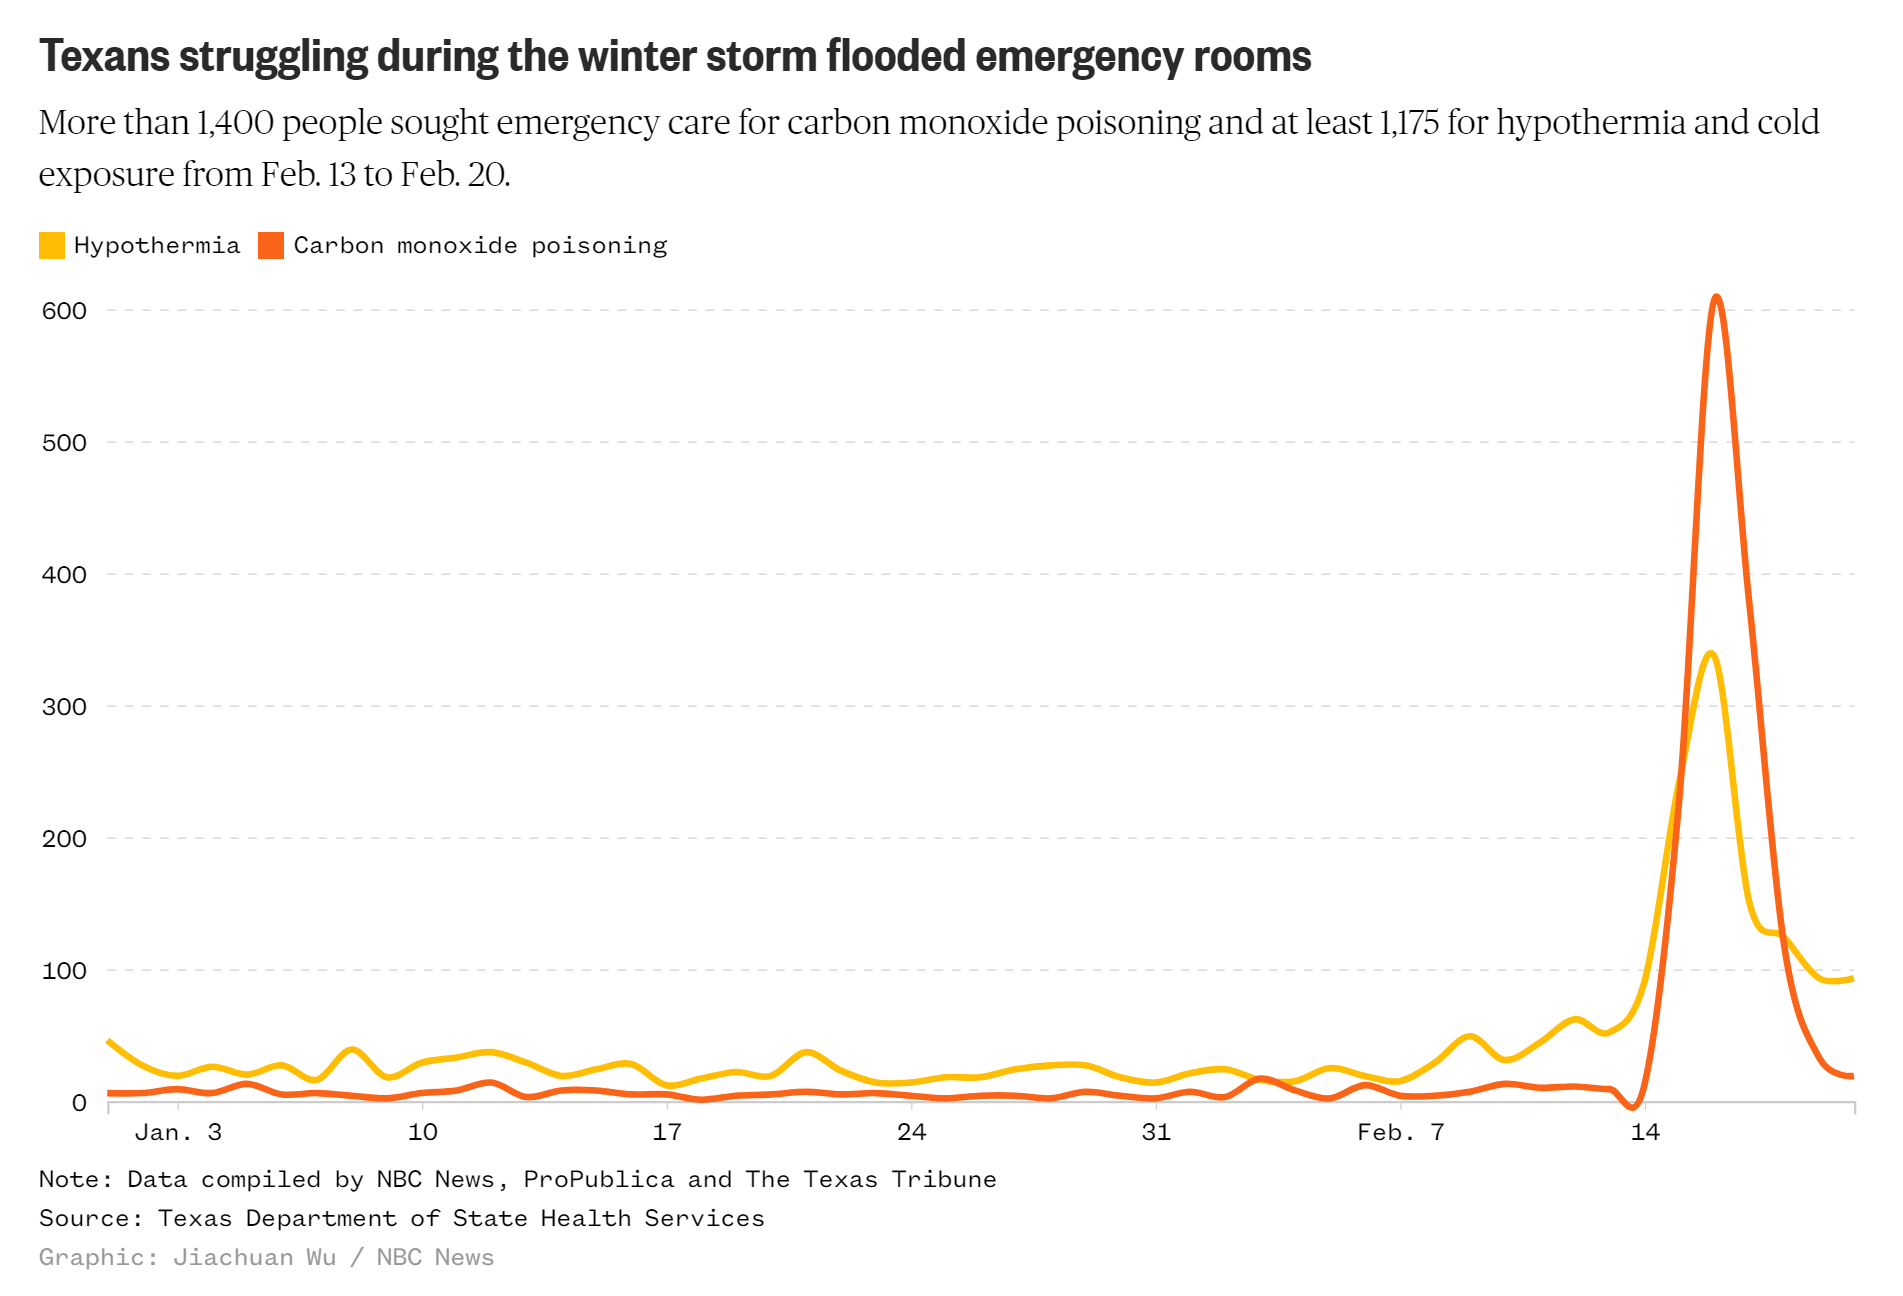 Emergency room admissions for carbon monoxide poisoning and hypothermia in Texas during Winter Storm Uri, 1 Jan 2021 to 2 February 2021. More than 1,400 people sought emergency care for carbon monoxide poisoning and at least 1,175 for hypothermia and cold exposure from 13 February 2021 to 20 February 2021. Data: Texas Department of State Health Services. Data compiled by NBC News, ProPublica, and The Texas Tribune. Graphic: Jiachuan Wu / NBC News